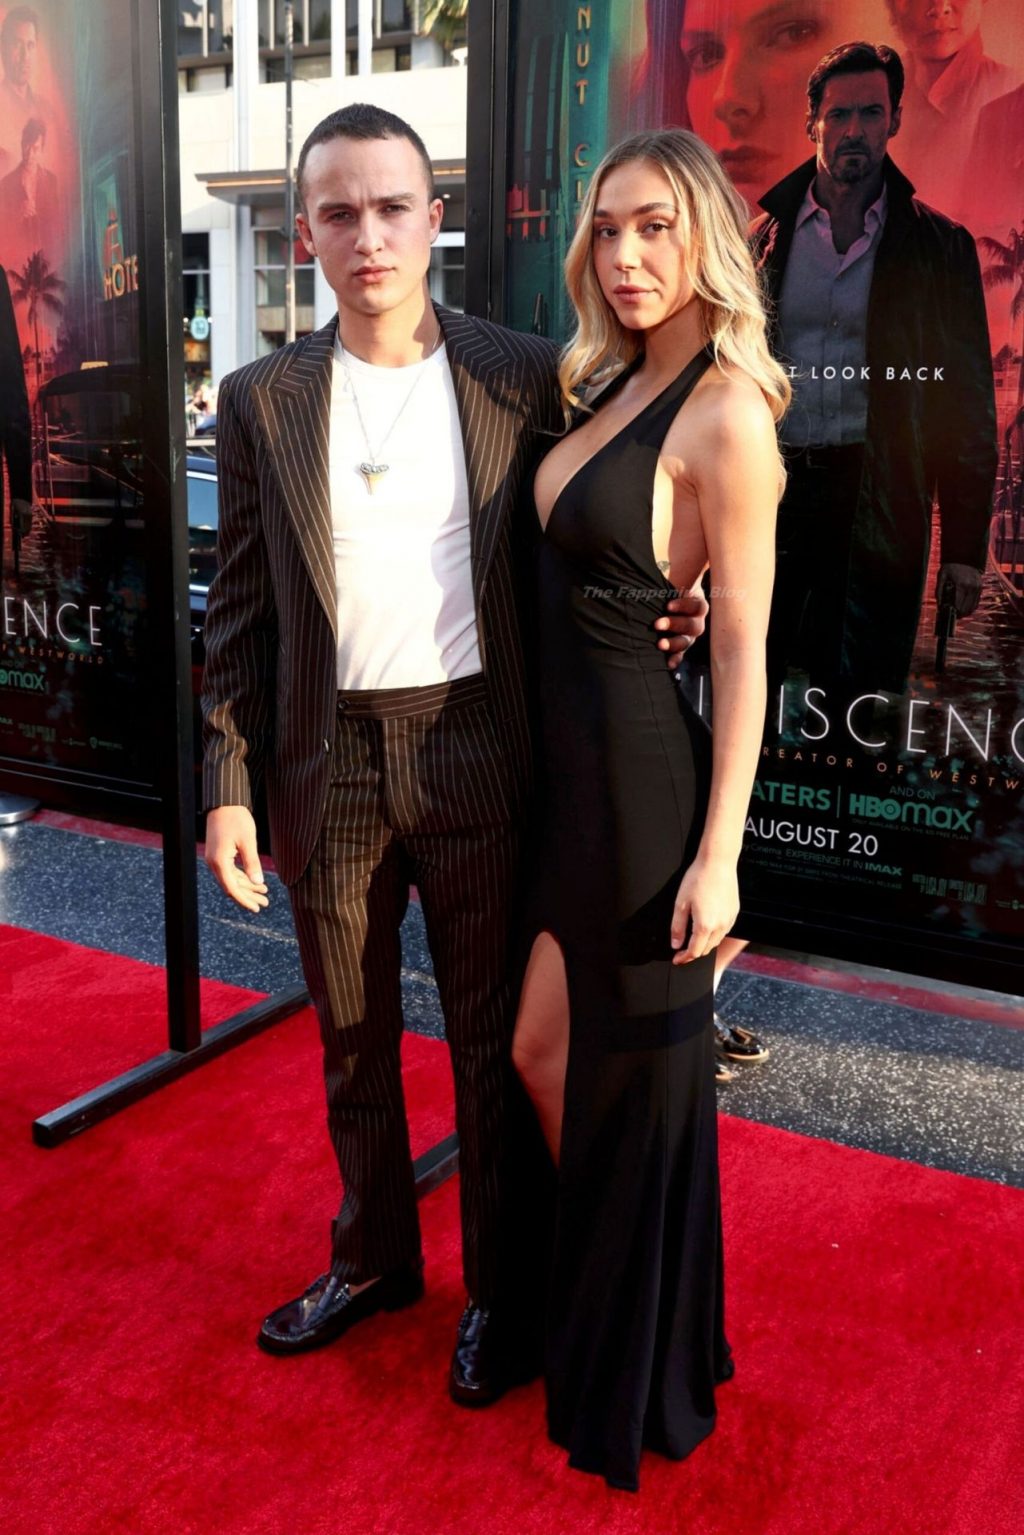 Alexis Ren Poses on the Red Carpet at the “Reminiscence” Premiere in LA (19 Photos)